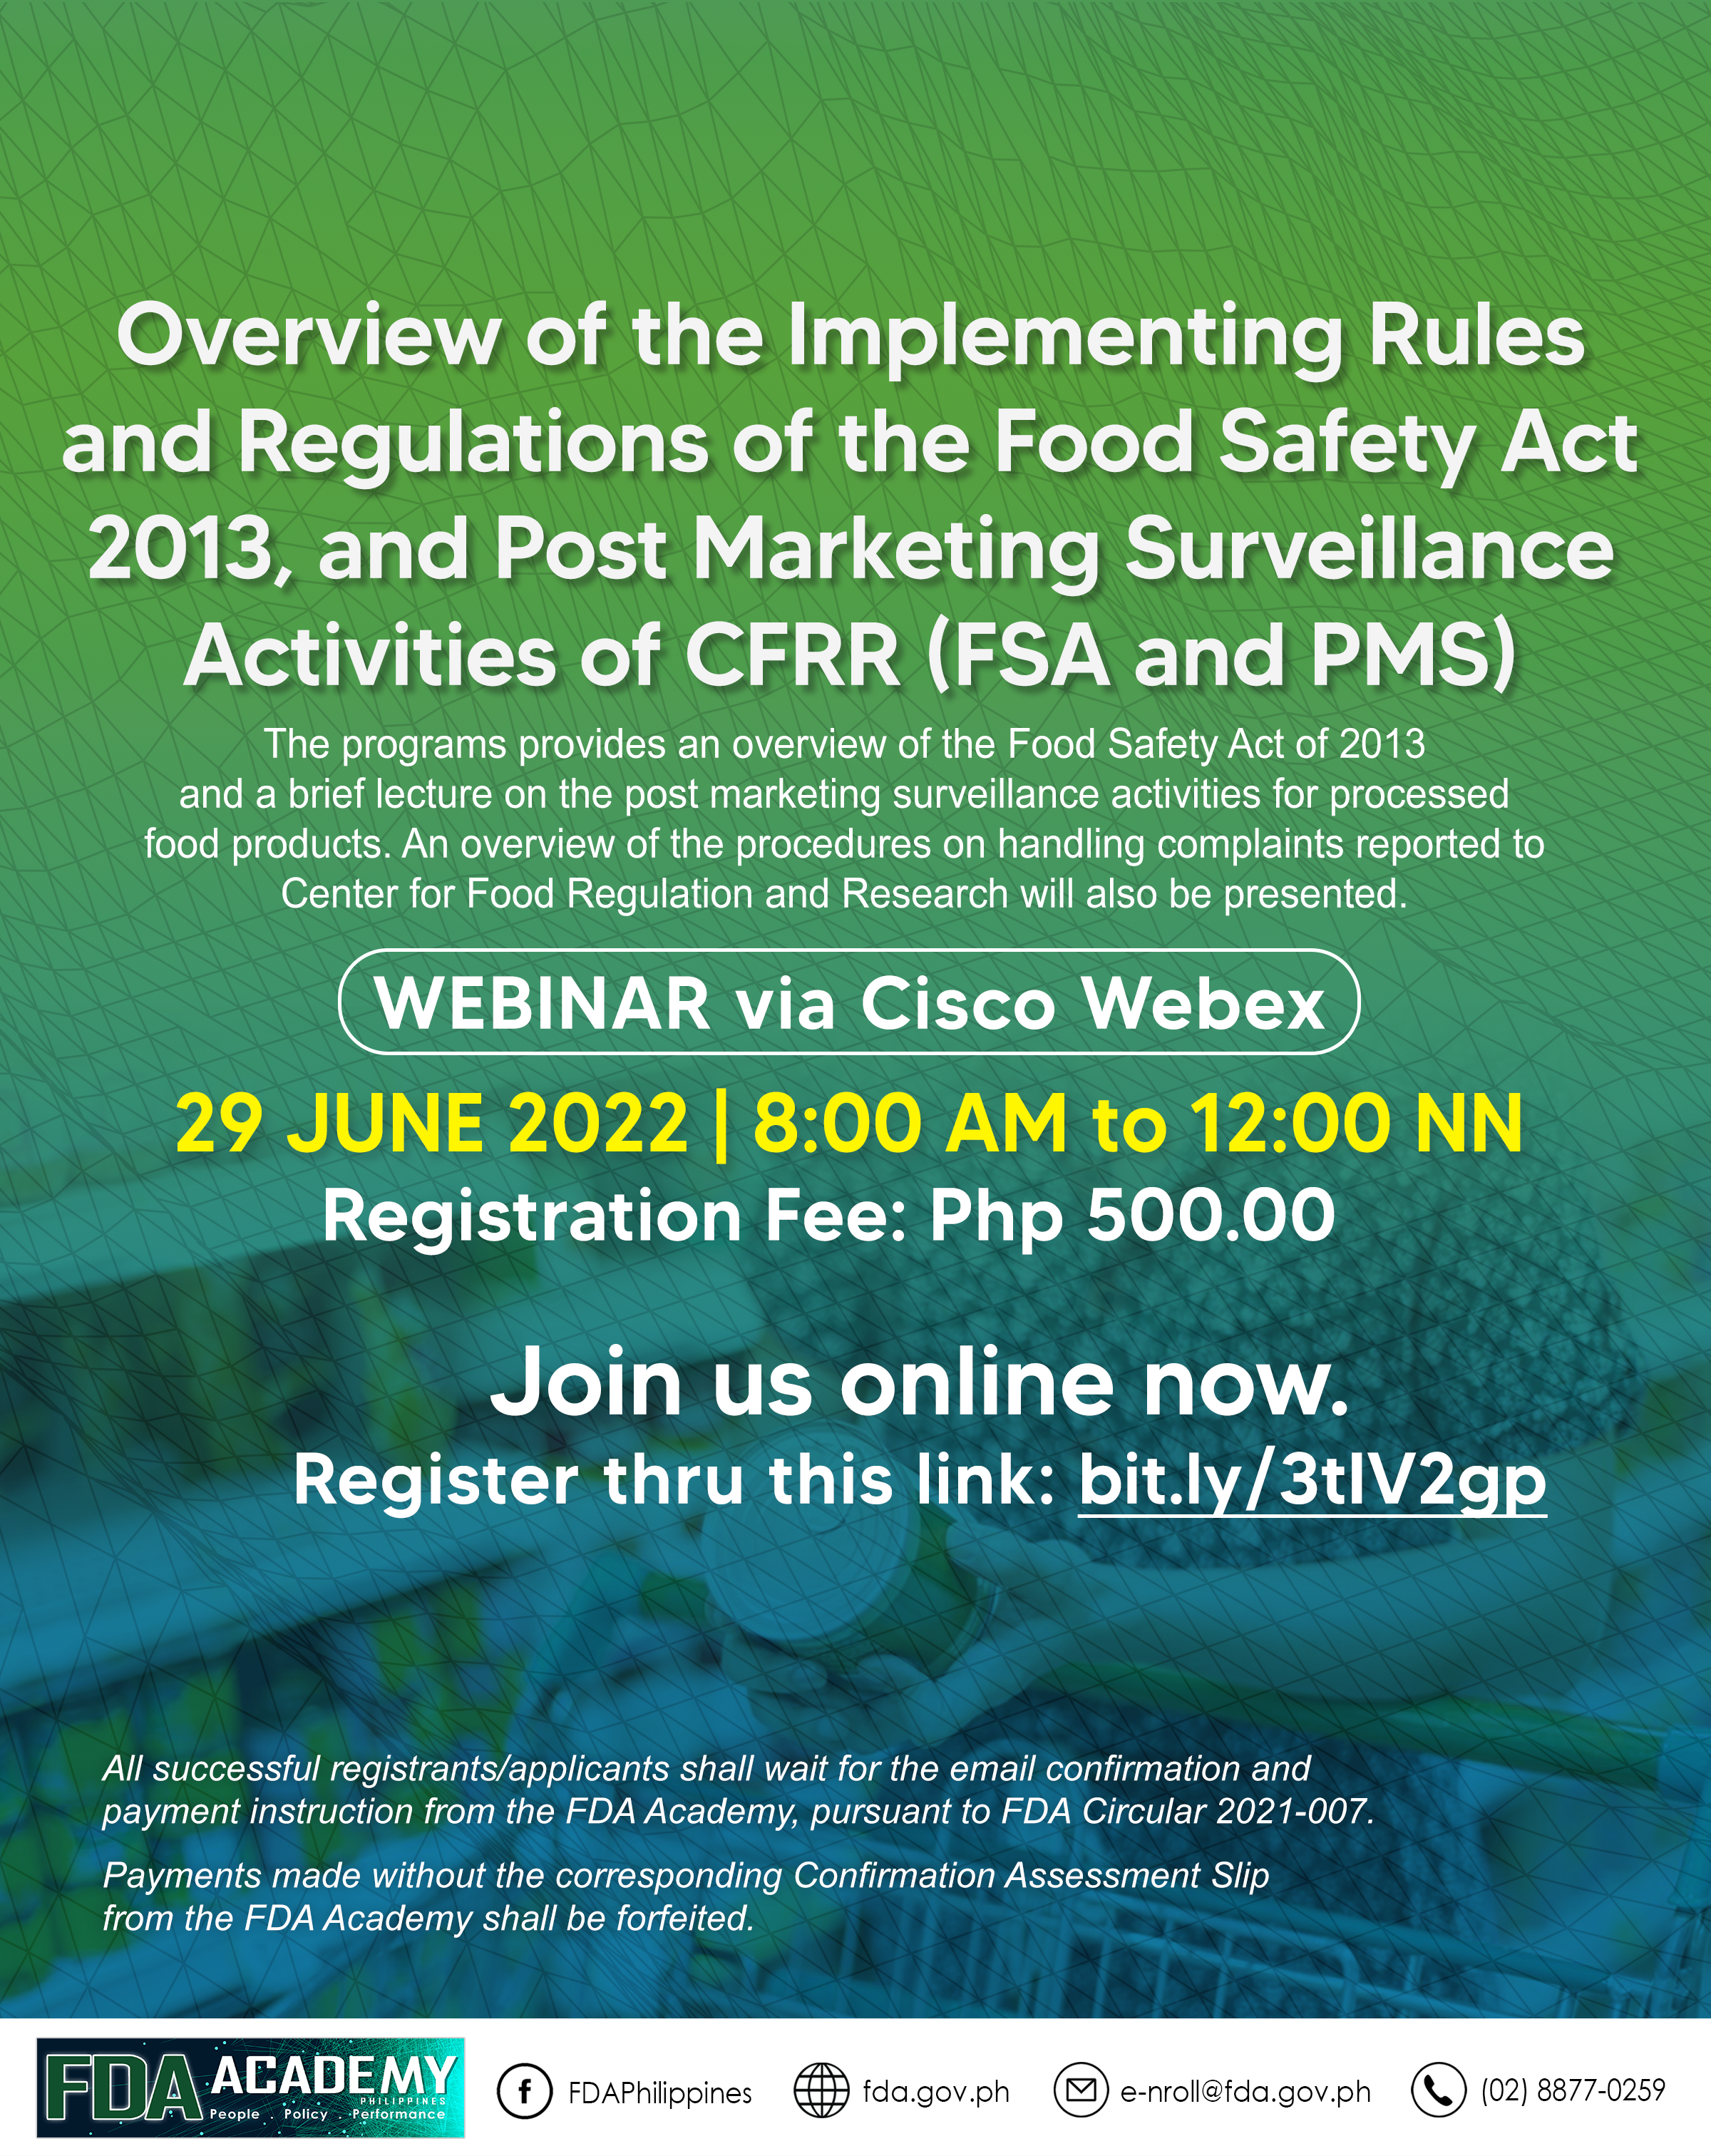 Announcement || OVERVIEW OF THE IMPLEMENTING RULES AND REGULATIONS OF THE FOOD SAFETY ACT 2013, AND POST MARKETING SURVEILLANCE ACTIVITIES OF CFRR (FDA & PMS)